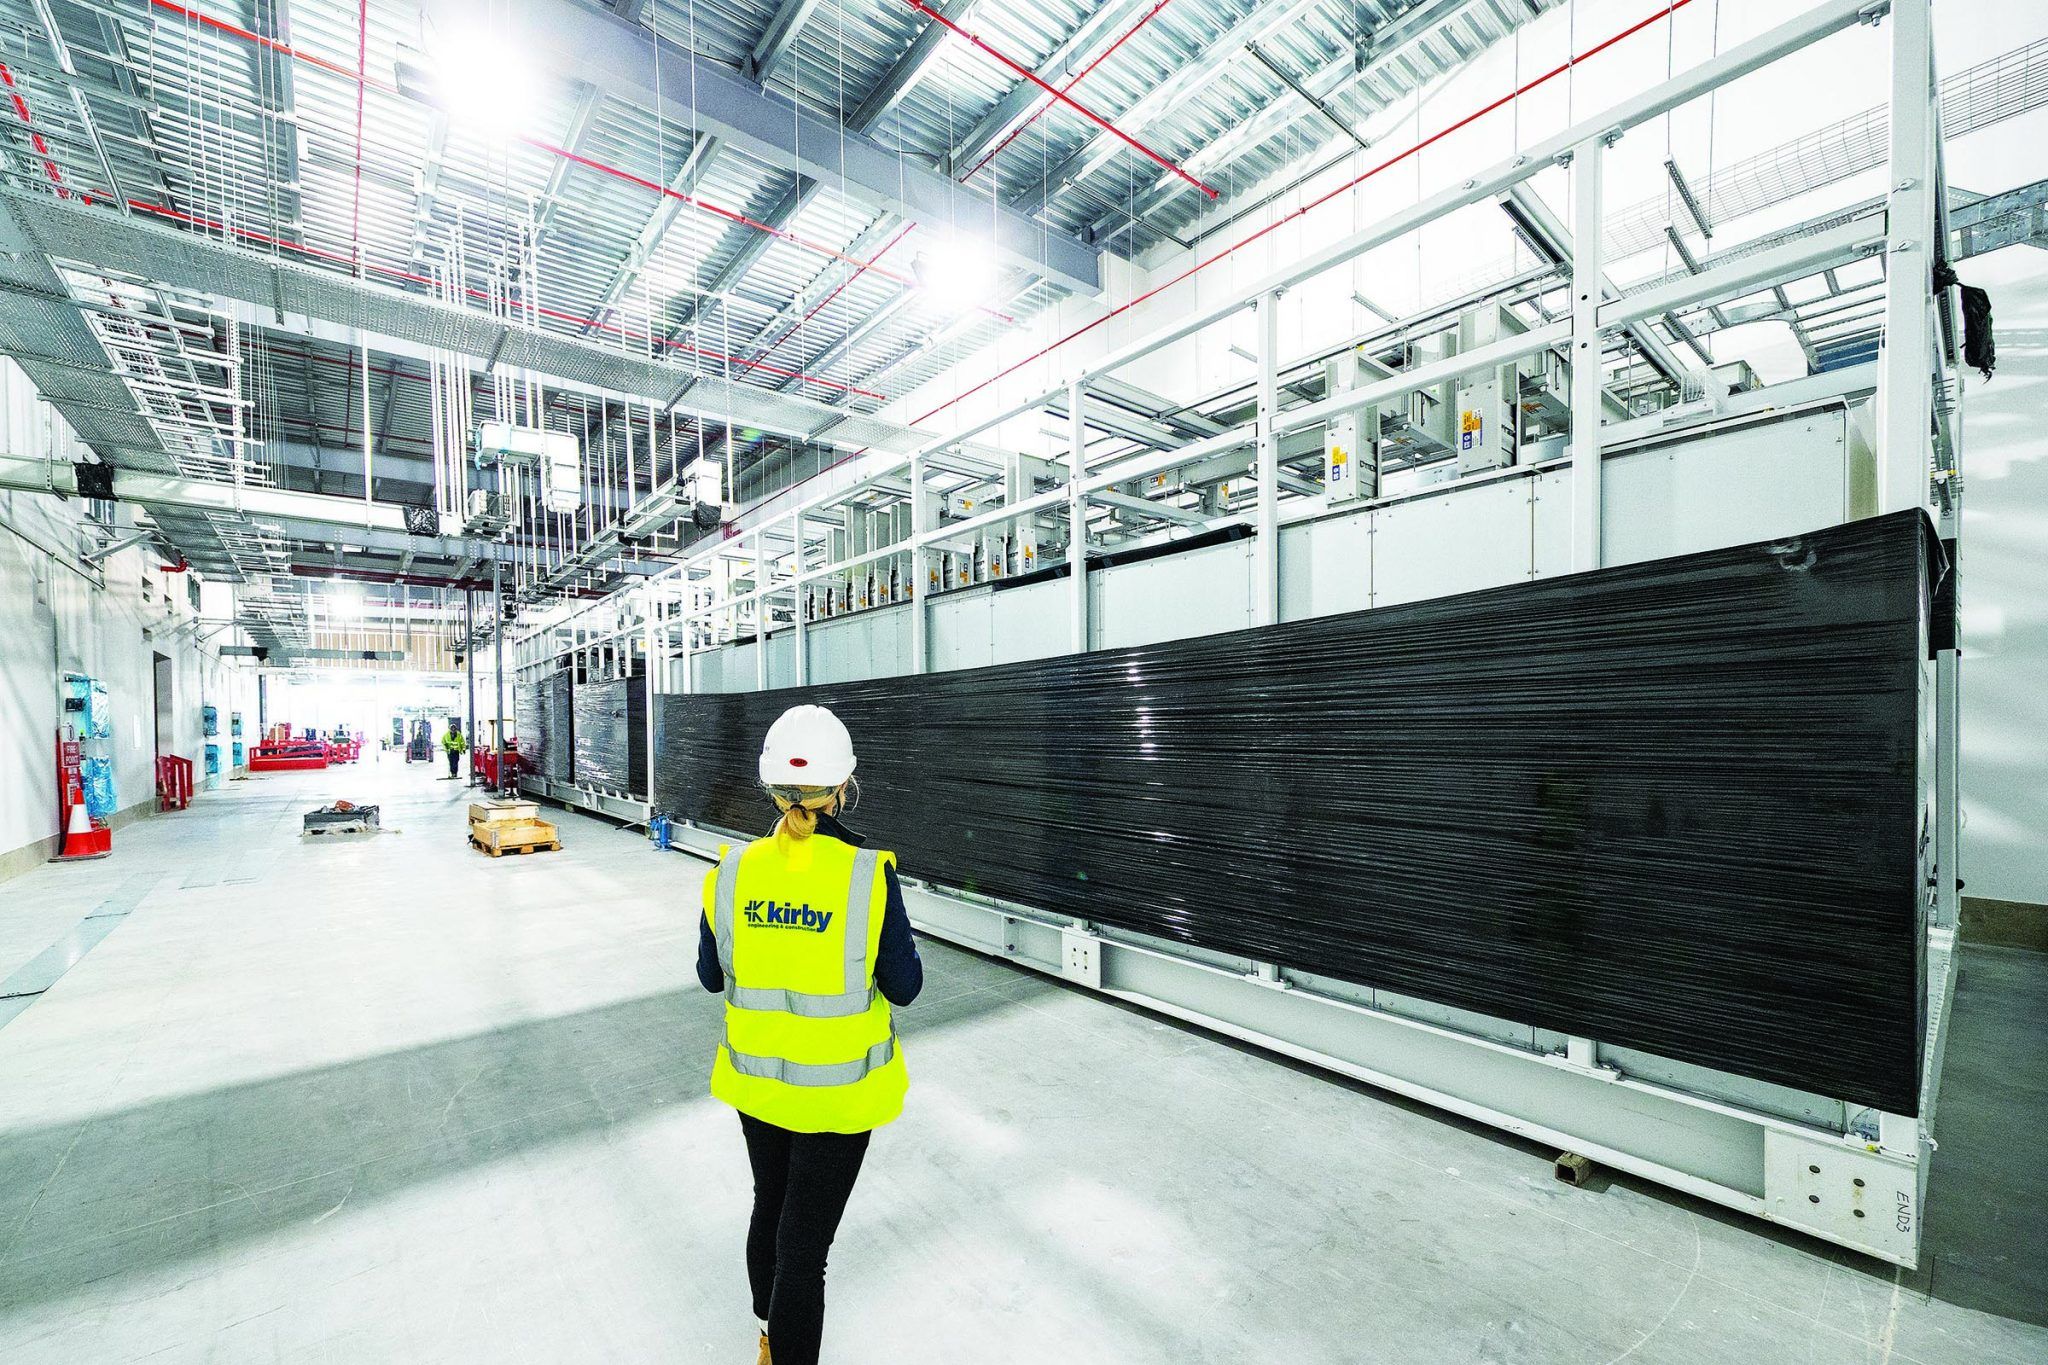 Connected Construction Supports Business Growth for Kirby Group